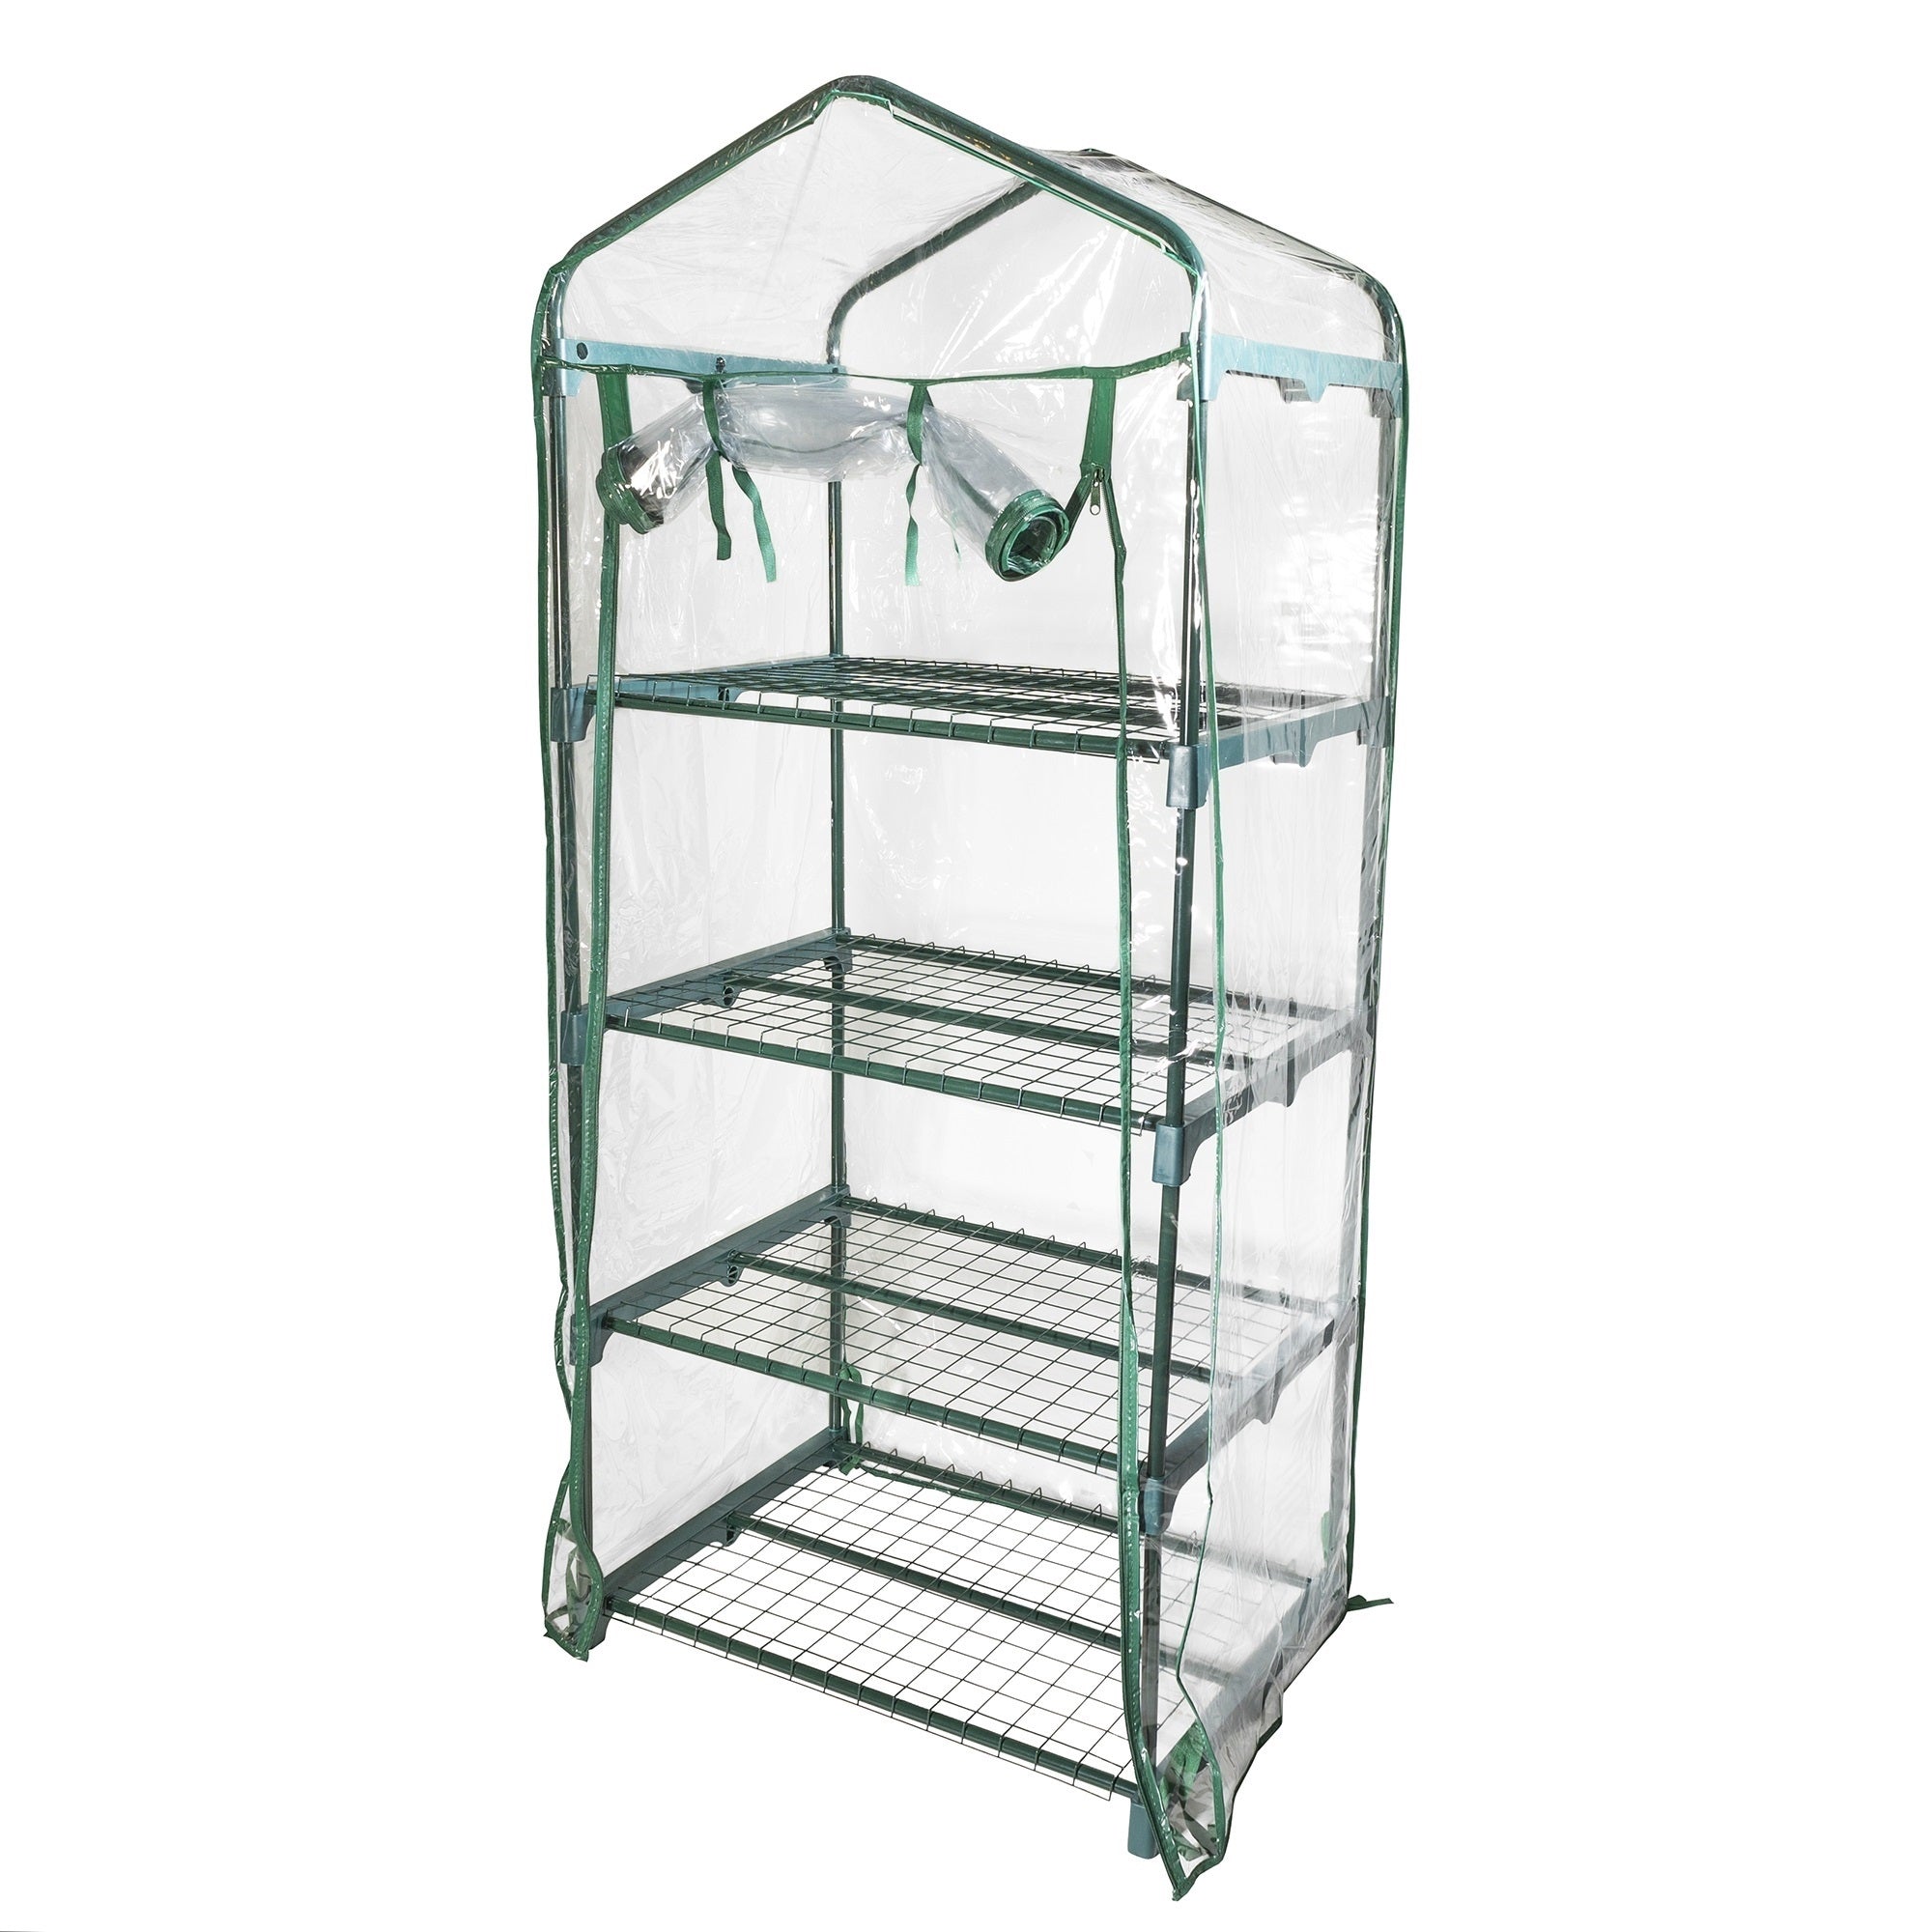 Garden Elements Personal Plastic Indoor Standing Greenhouse For Seed Starting and Propagation, Frost Protection, Clear, Small, 27" x 19" x 62"